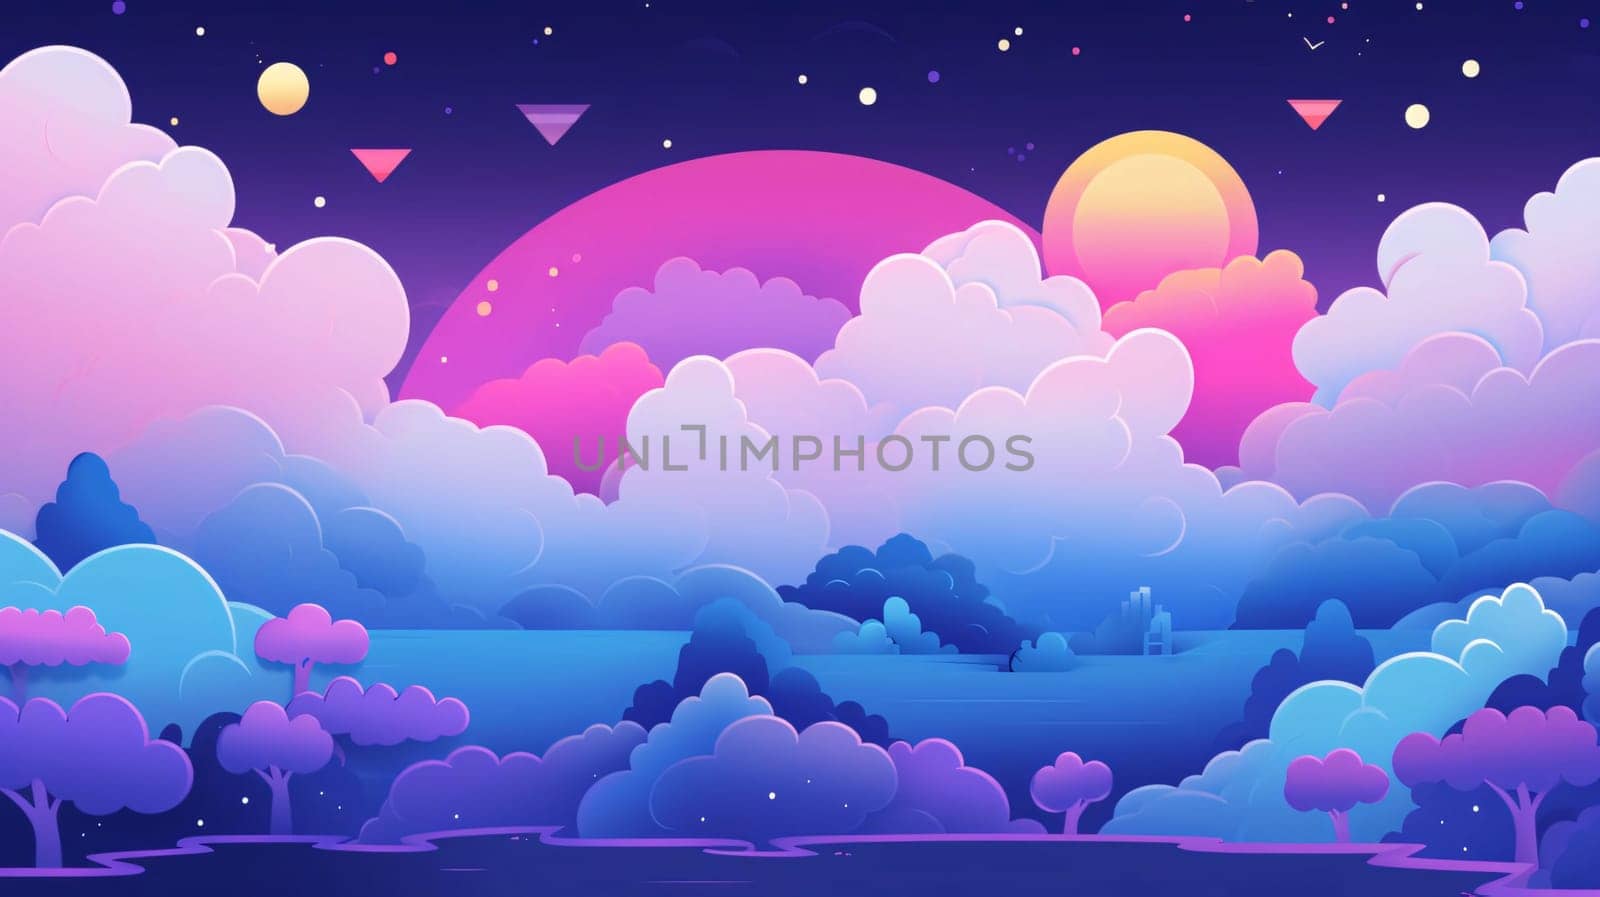 Night landscape with clouds, sun, moon and stars. Vector illustration. by ThemesS